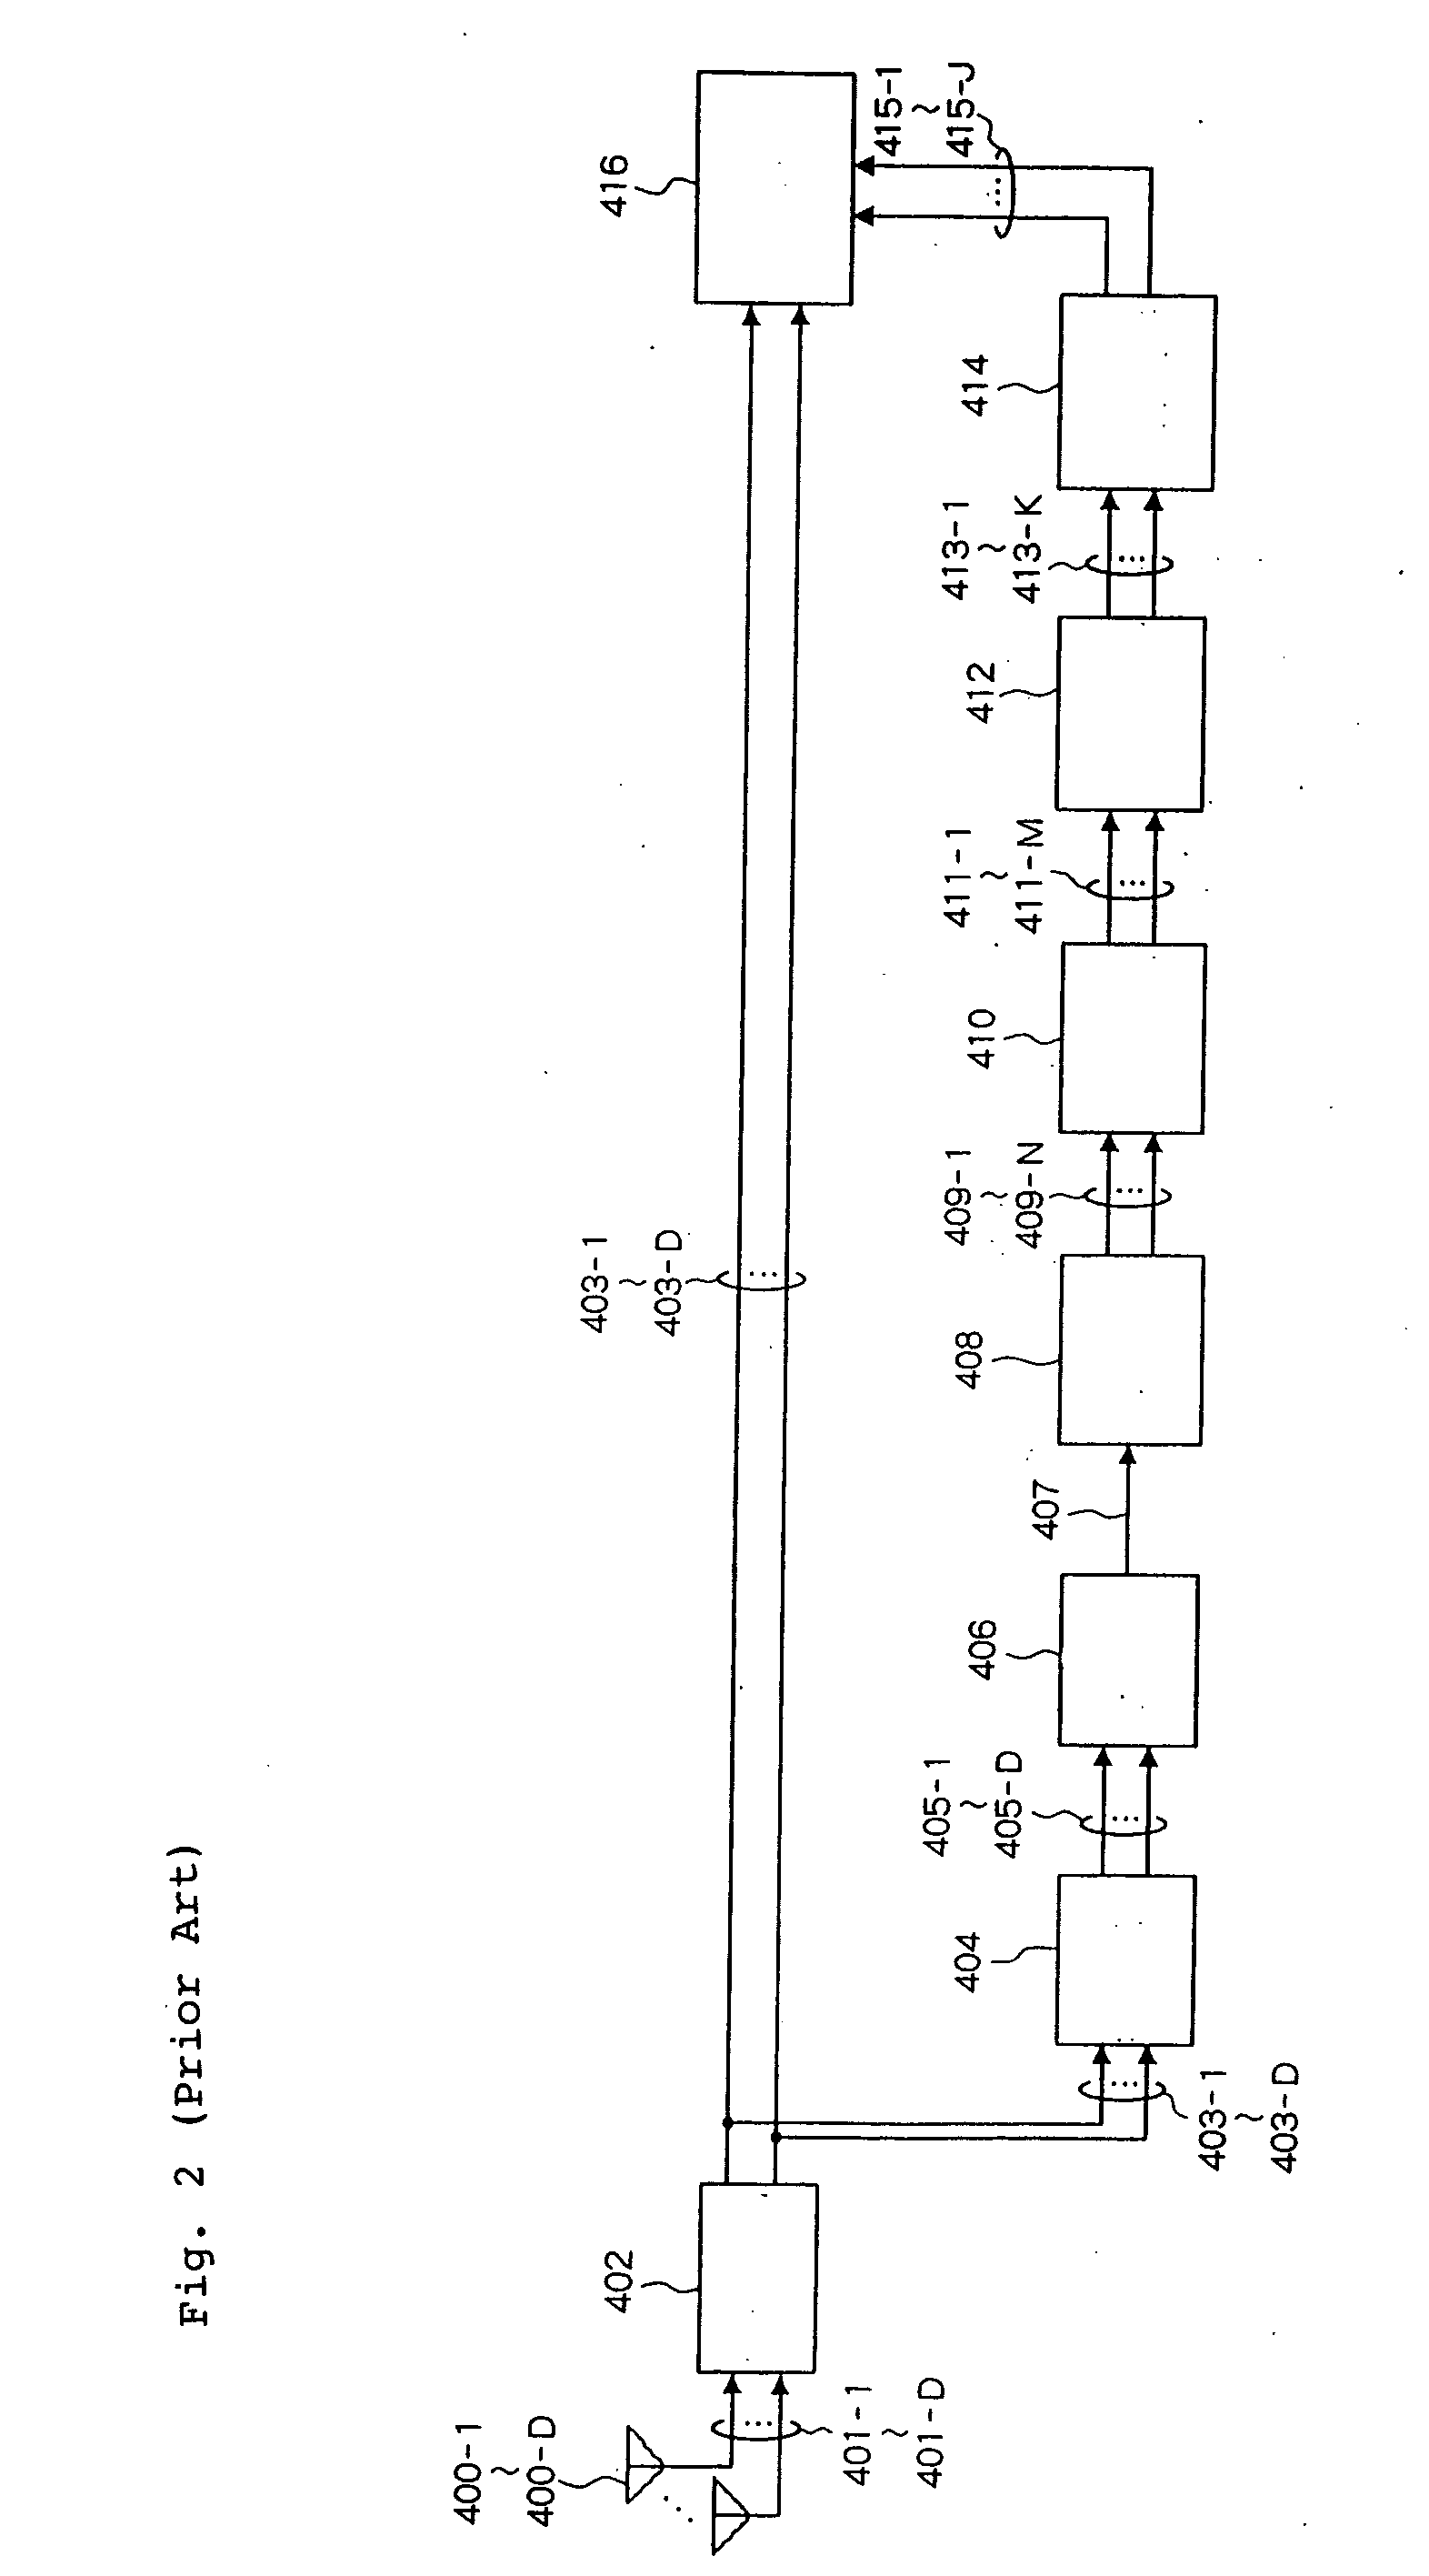 Detection of synchronization timing in CDMA receiving apparatus